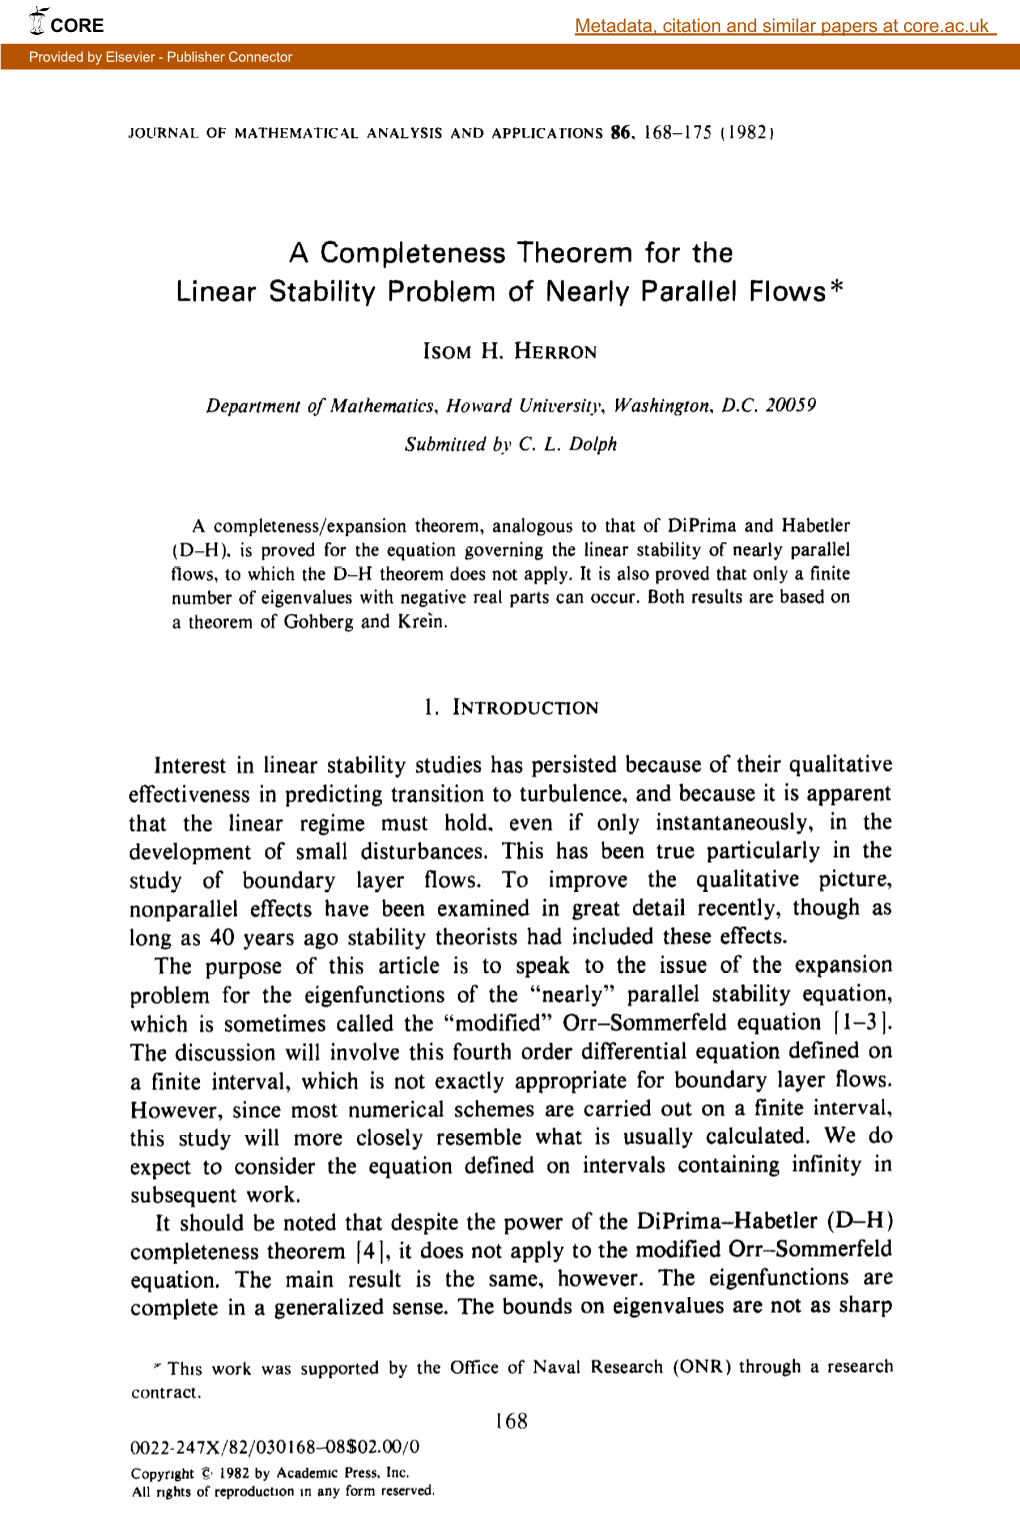 A Completeness Theorem for the Linear Stability Problem of Nearly Parallel Flows*